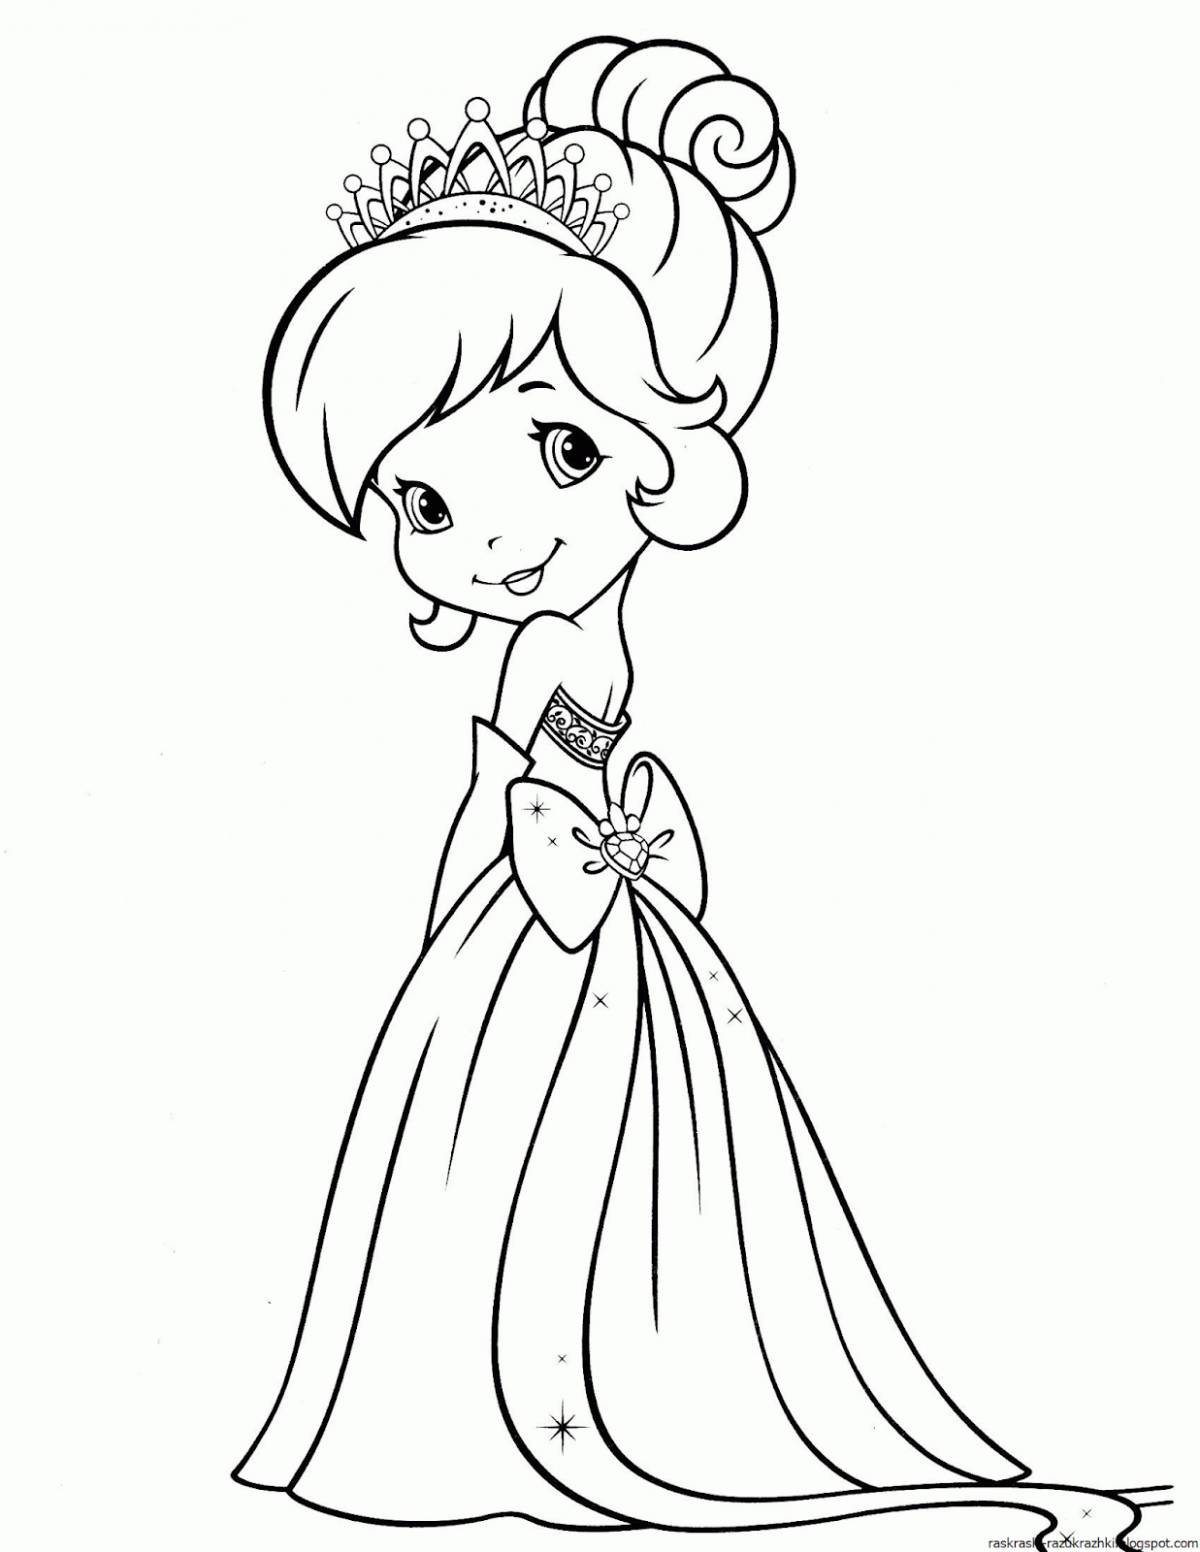 Fun coloring princess for children 5-6 years old